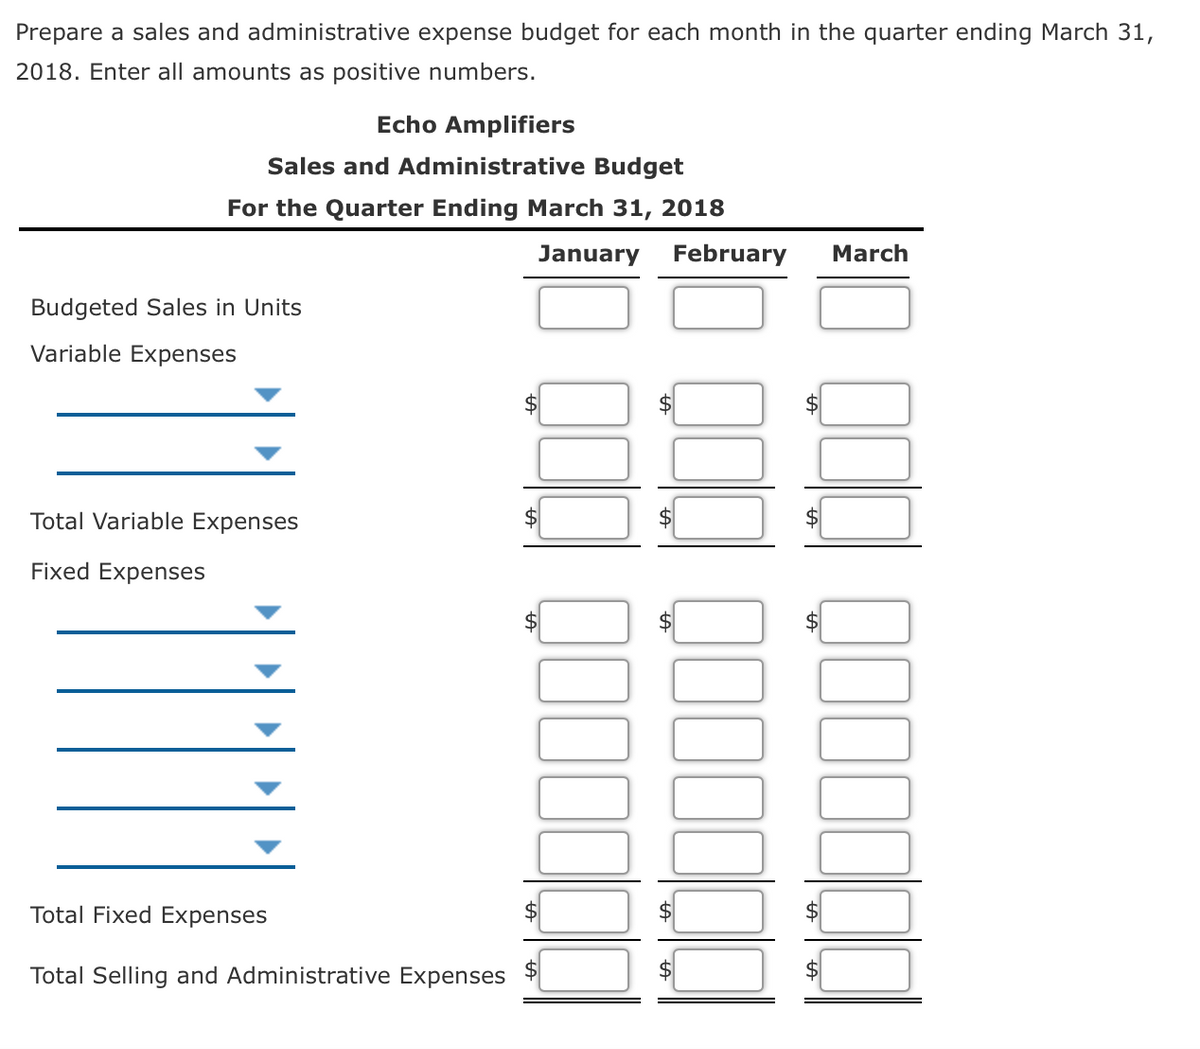 Prepare a sales and administrative expense budget for each month in the quarter ending March 31,
2018. Enter all amounts as positive numbers.
Echo Amplifiers
Sales and Administrative Budget
For the Quarter Ending March 31, 2018
January
February
March
Budgeted Sales in Units
Variable Expenses
$
$4
Total Variable Expenses
Fixed Expenses
2$
$
Total Fixed Expenses
2$
$
Total Selling and Administrative Expenses
